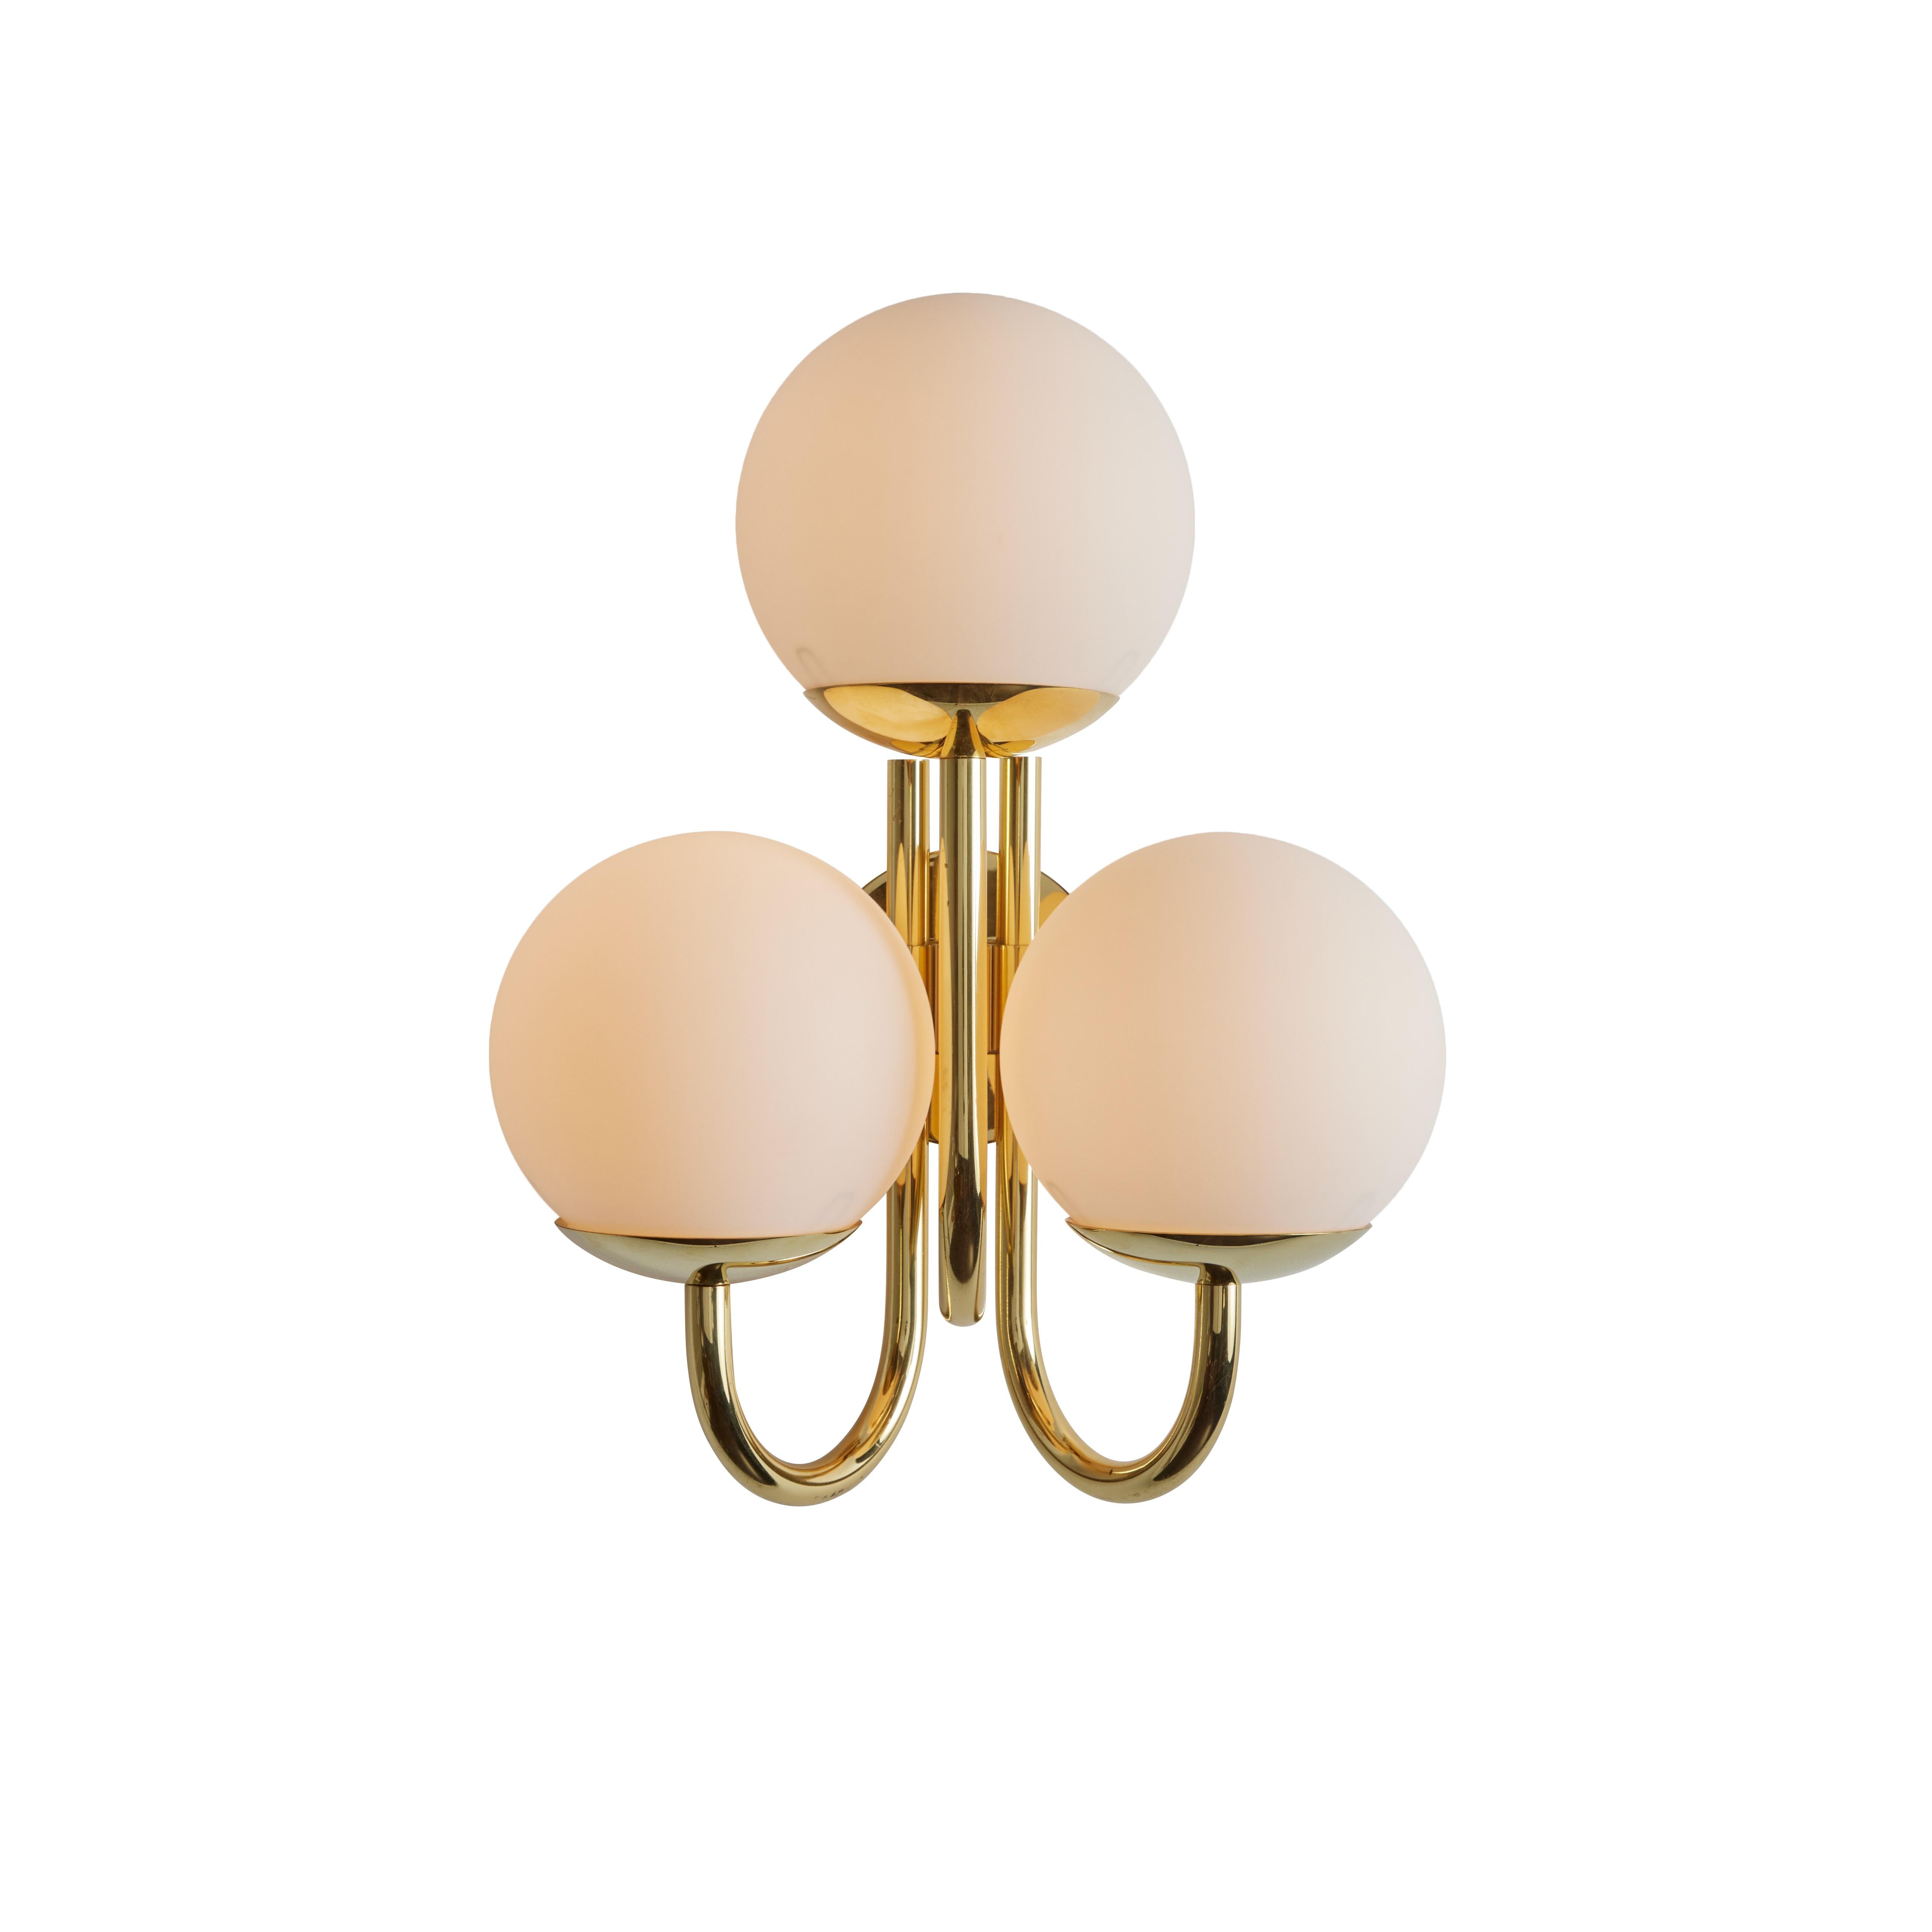 Large pair of 1960s 3-arm glass & brass wall lamps for Limberg. Comprised of 3x opaline glass globes (6 inches diameter) with a polished brass structure. Fabricated in Germany, circa 1960s with manufacturer's mark in the metal.

Price is for the